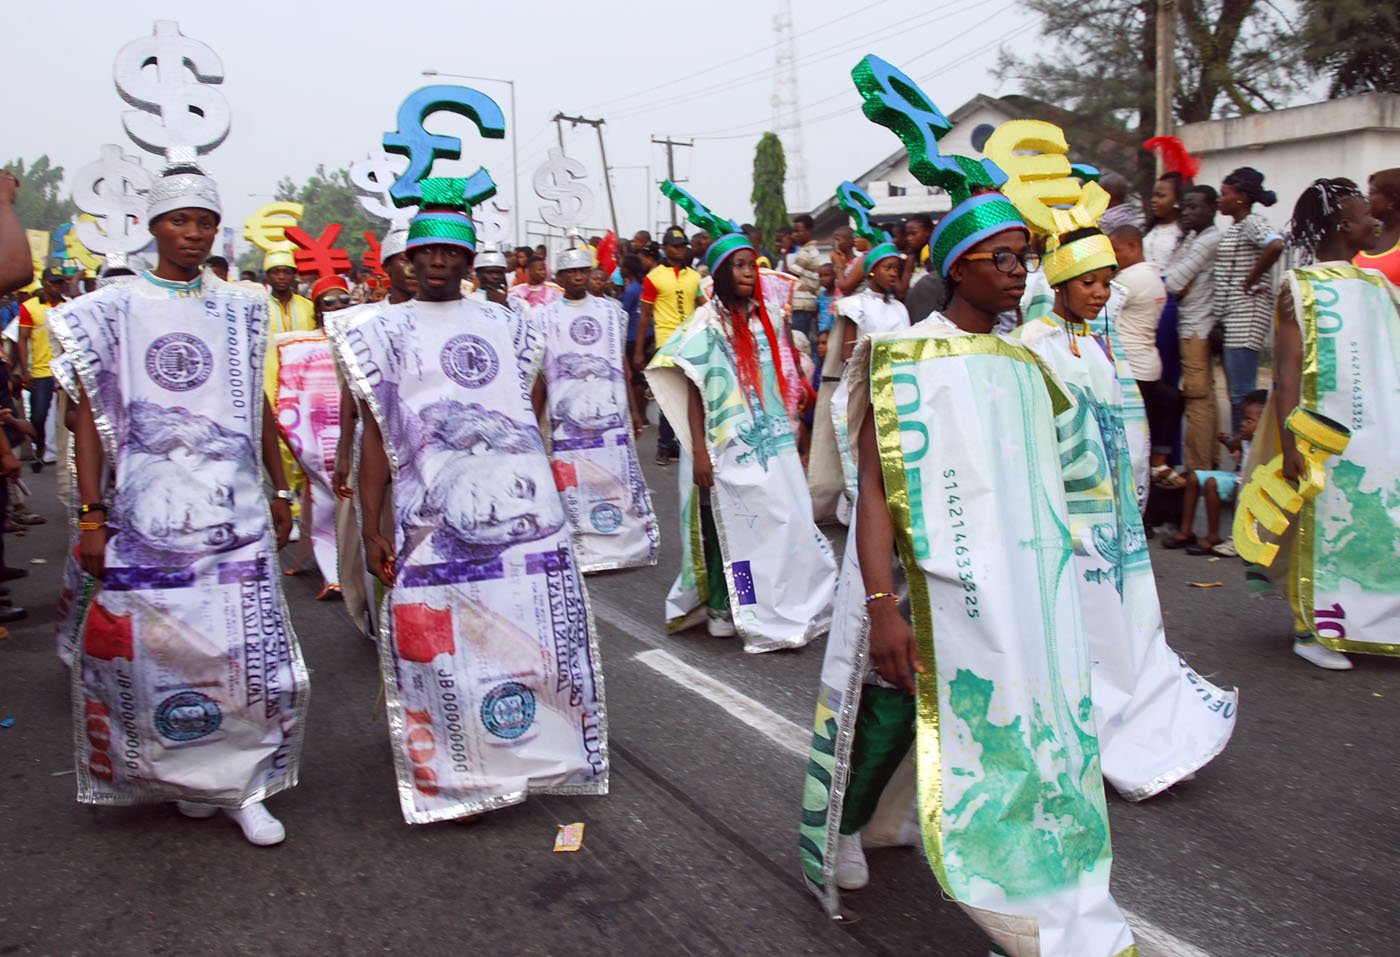 Members of Freedom Band wearing Foreign Currency Costume during the Main Event of the 2017 Carnival Calabar in Cross River State Yesterday. Photo: Nwankpa Chijioke